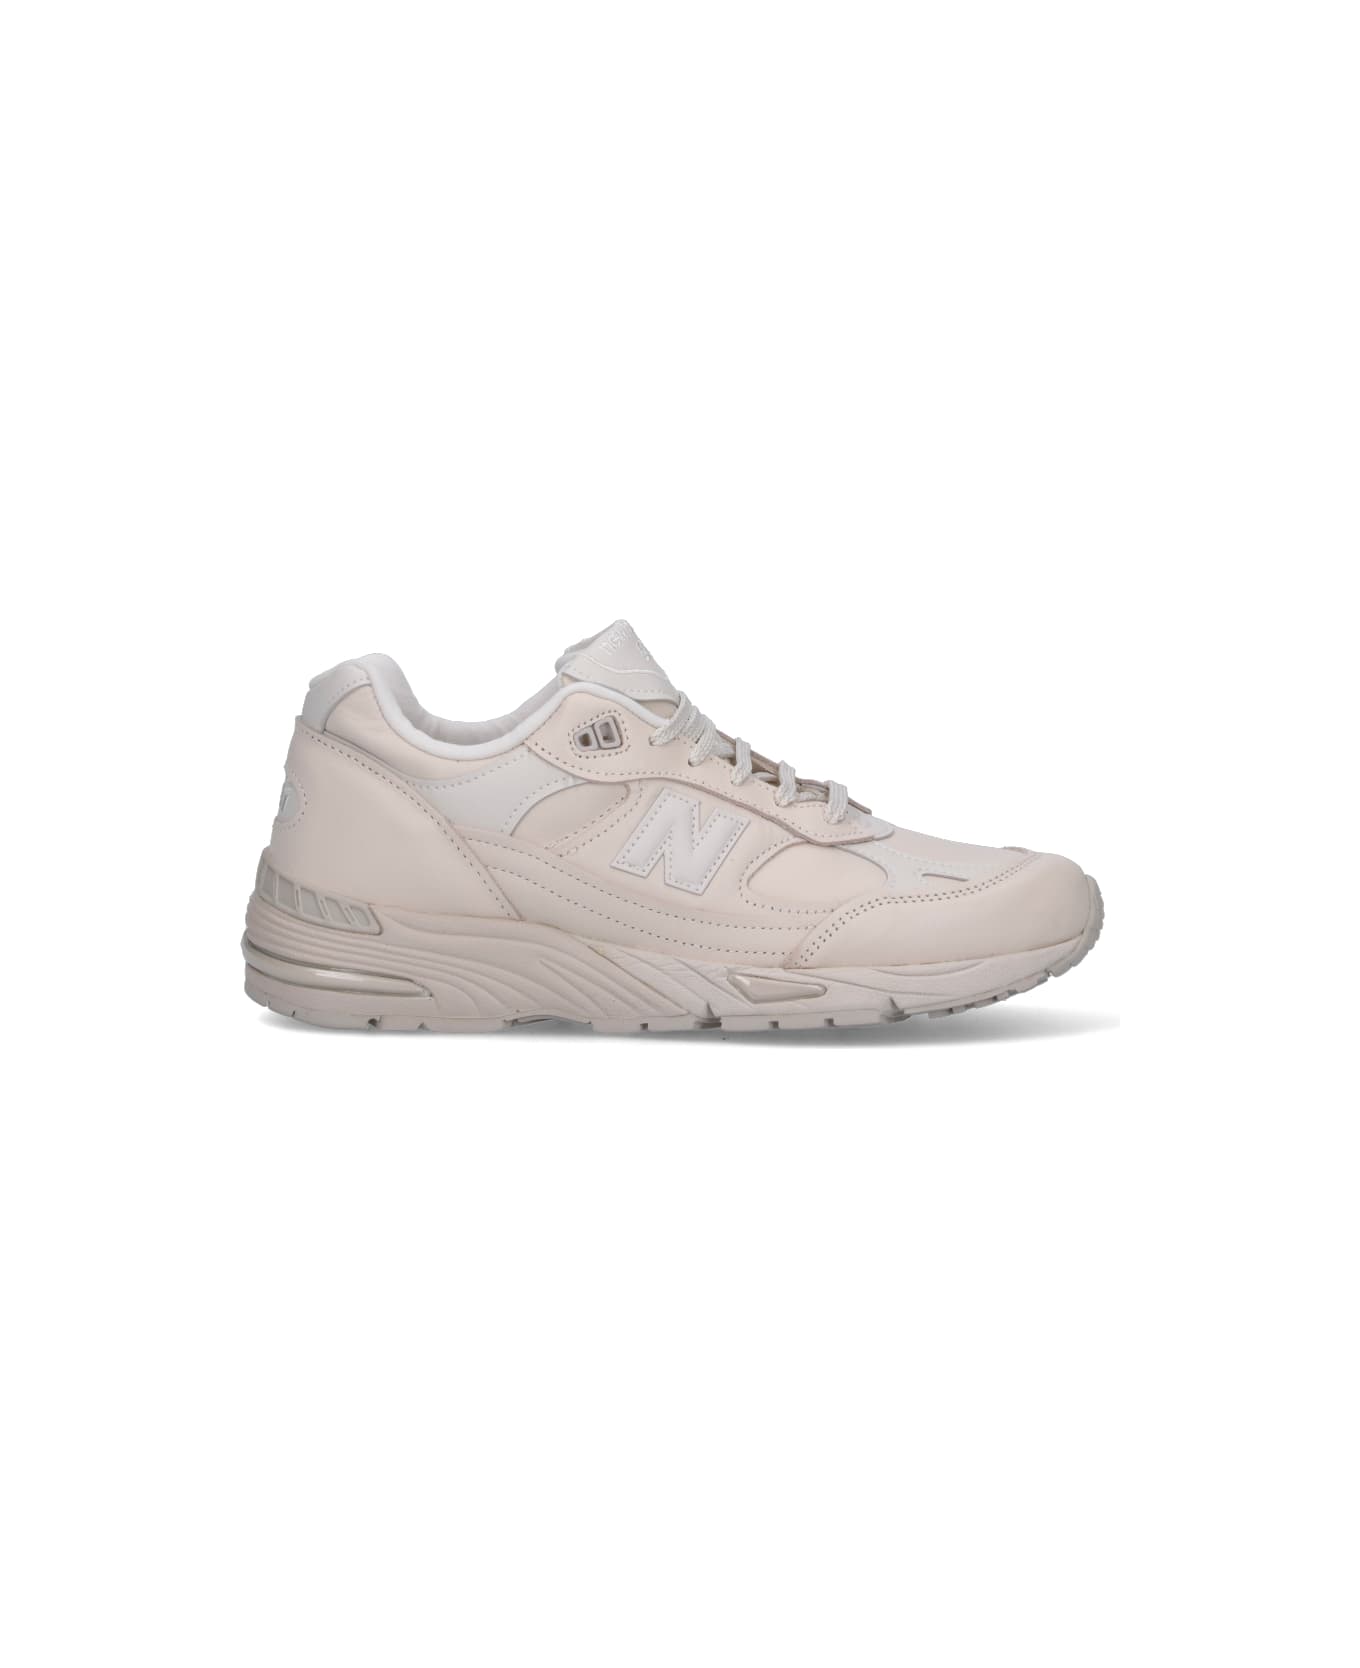 New Balance 'made In Uk 991v1' Sneakers - White